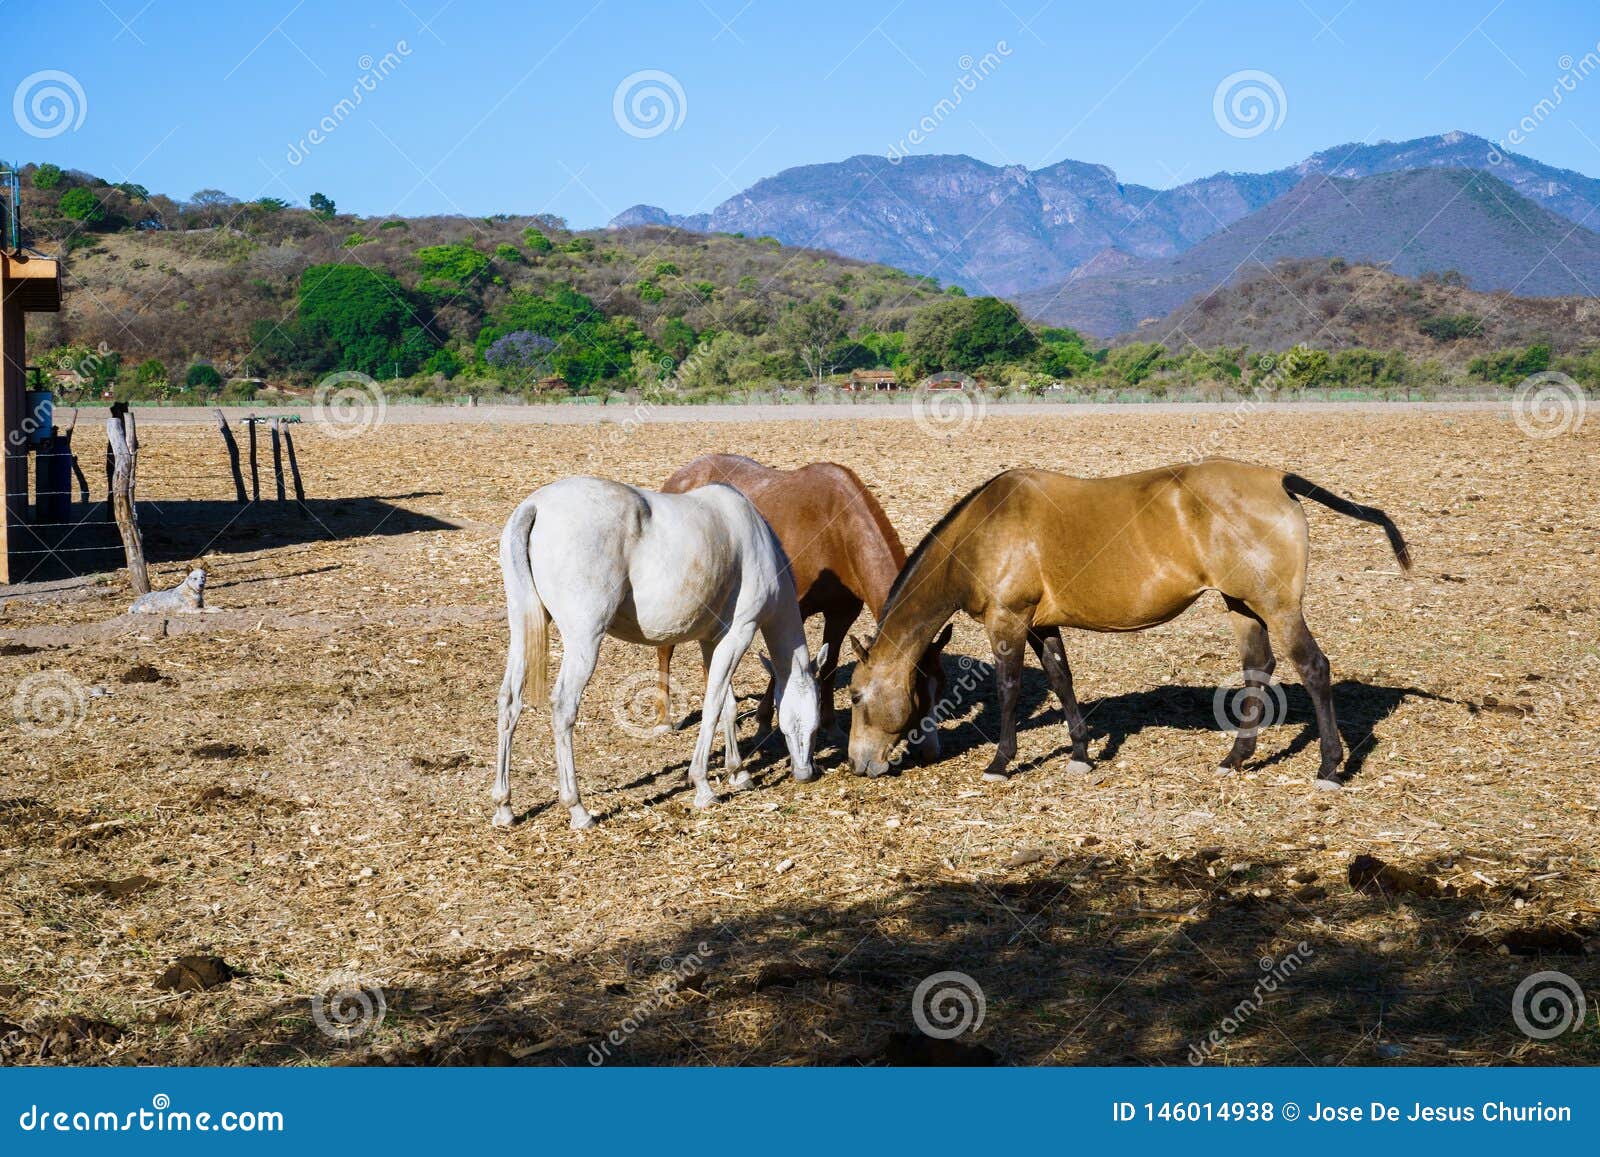 mascota jalisco mexico, horses are grazing in the field in the morning.